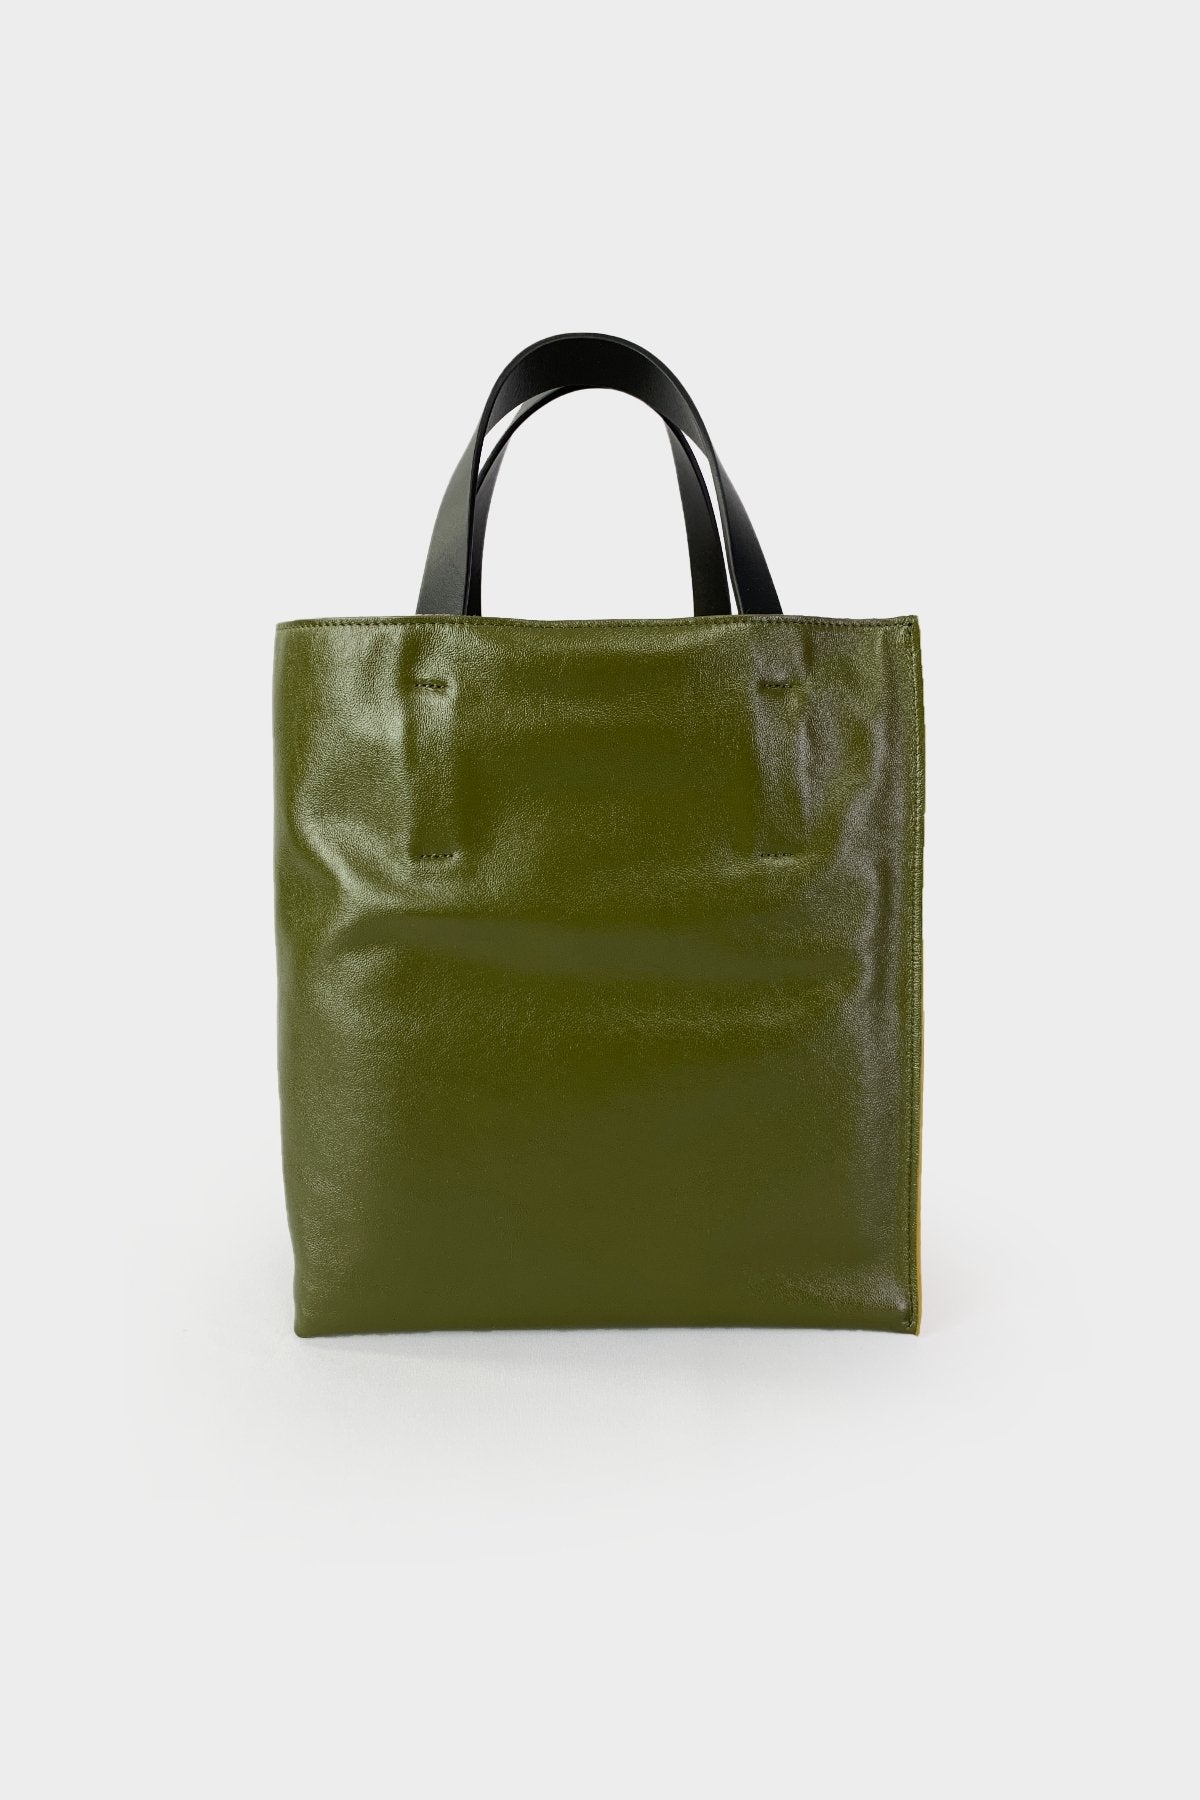 Gold and Green Tumbled Leather Museo Soft Bag - shop-olivia.com